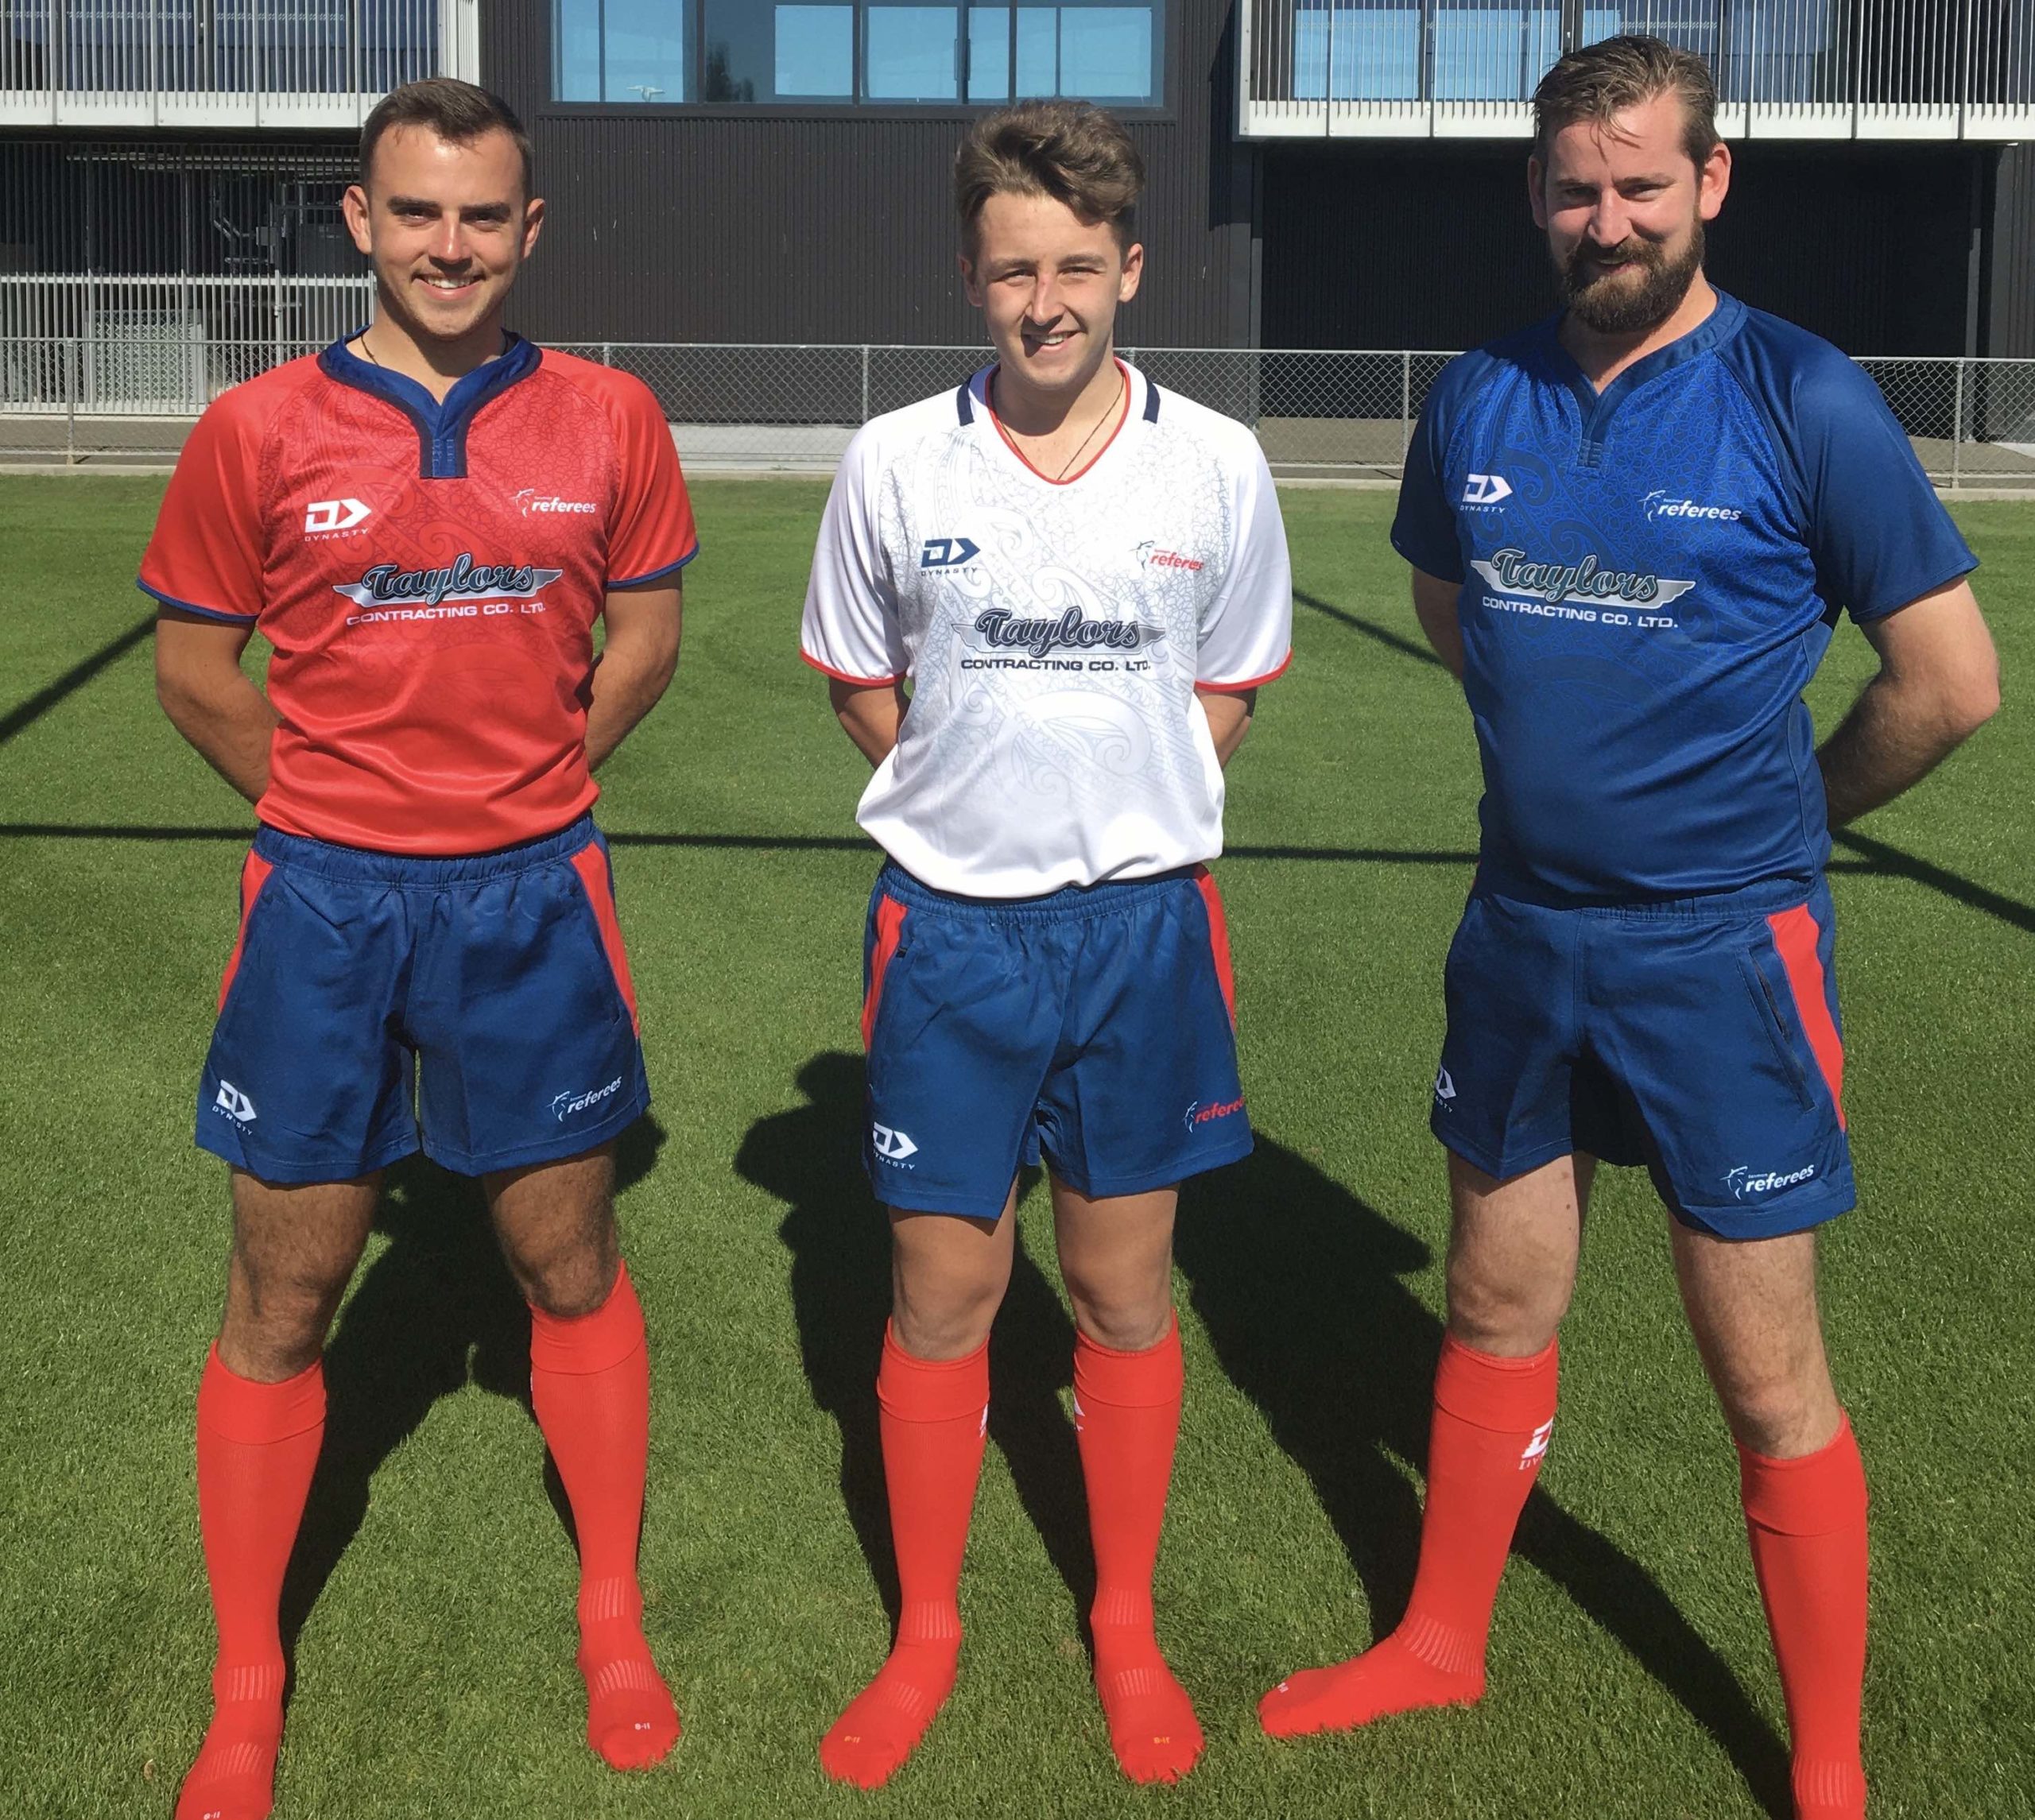 New Tasman Rugby Union referees’ apparel carries mana of Te Tauihu iwi in its design